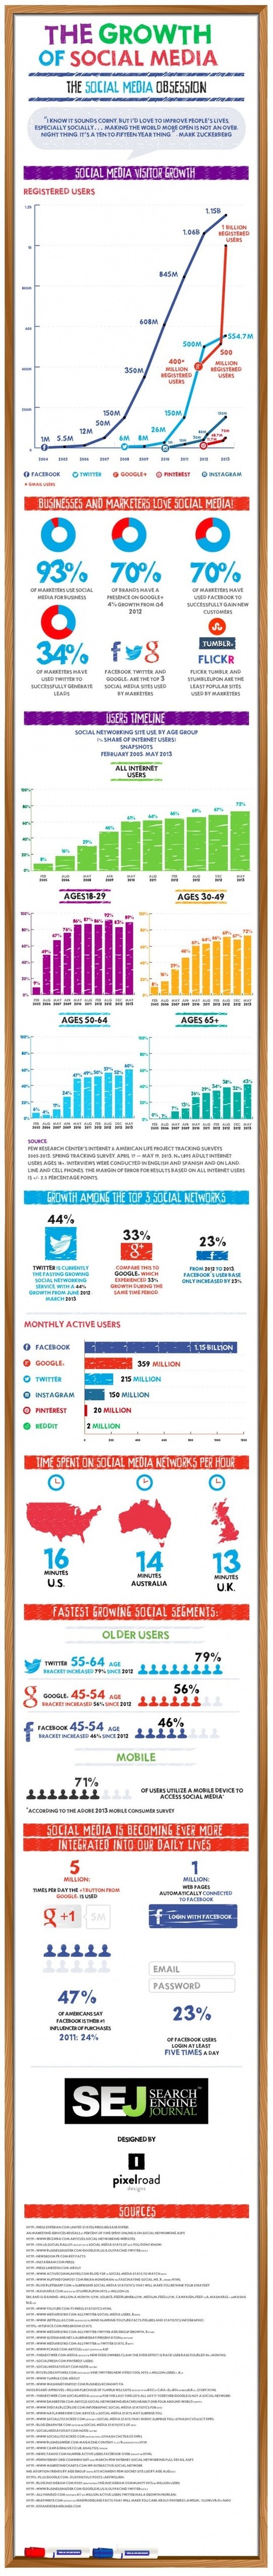 The Growth of Social Media v2.0 [INFOGRAPHIC] - Search Engine Journal | Infographics and Social Media | Scoop.it